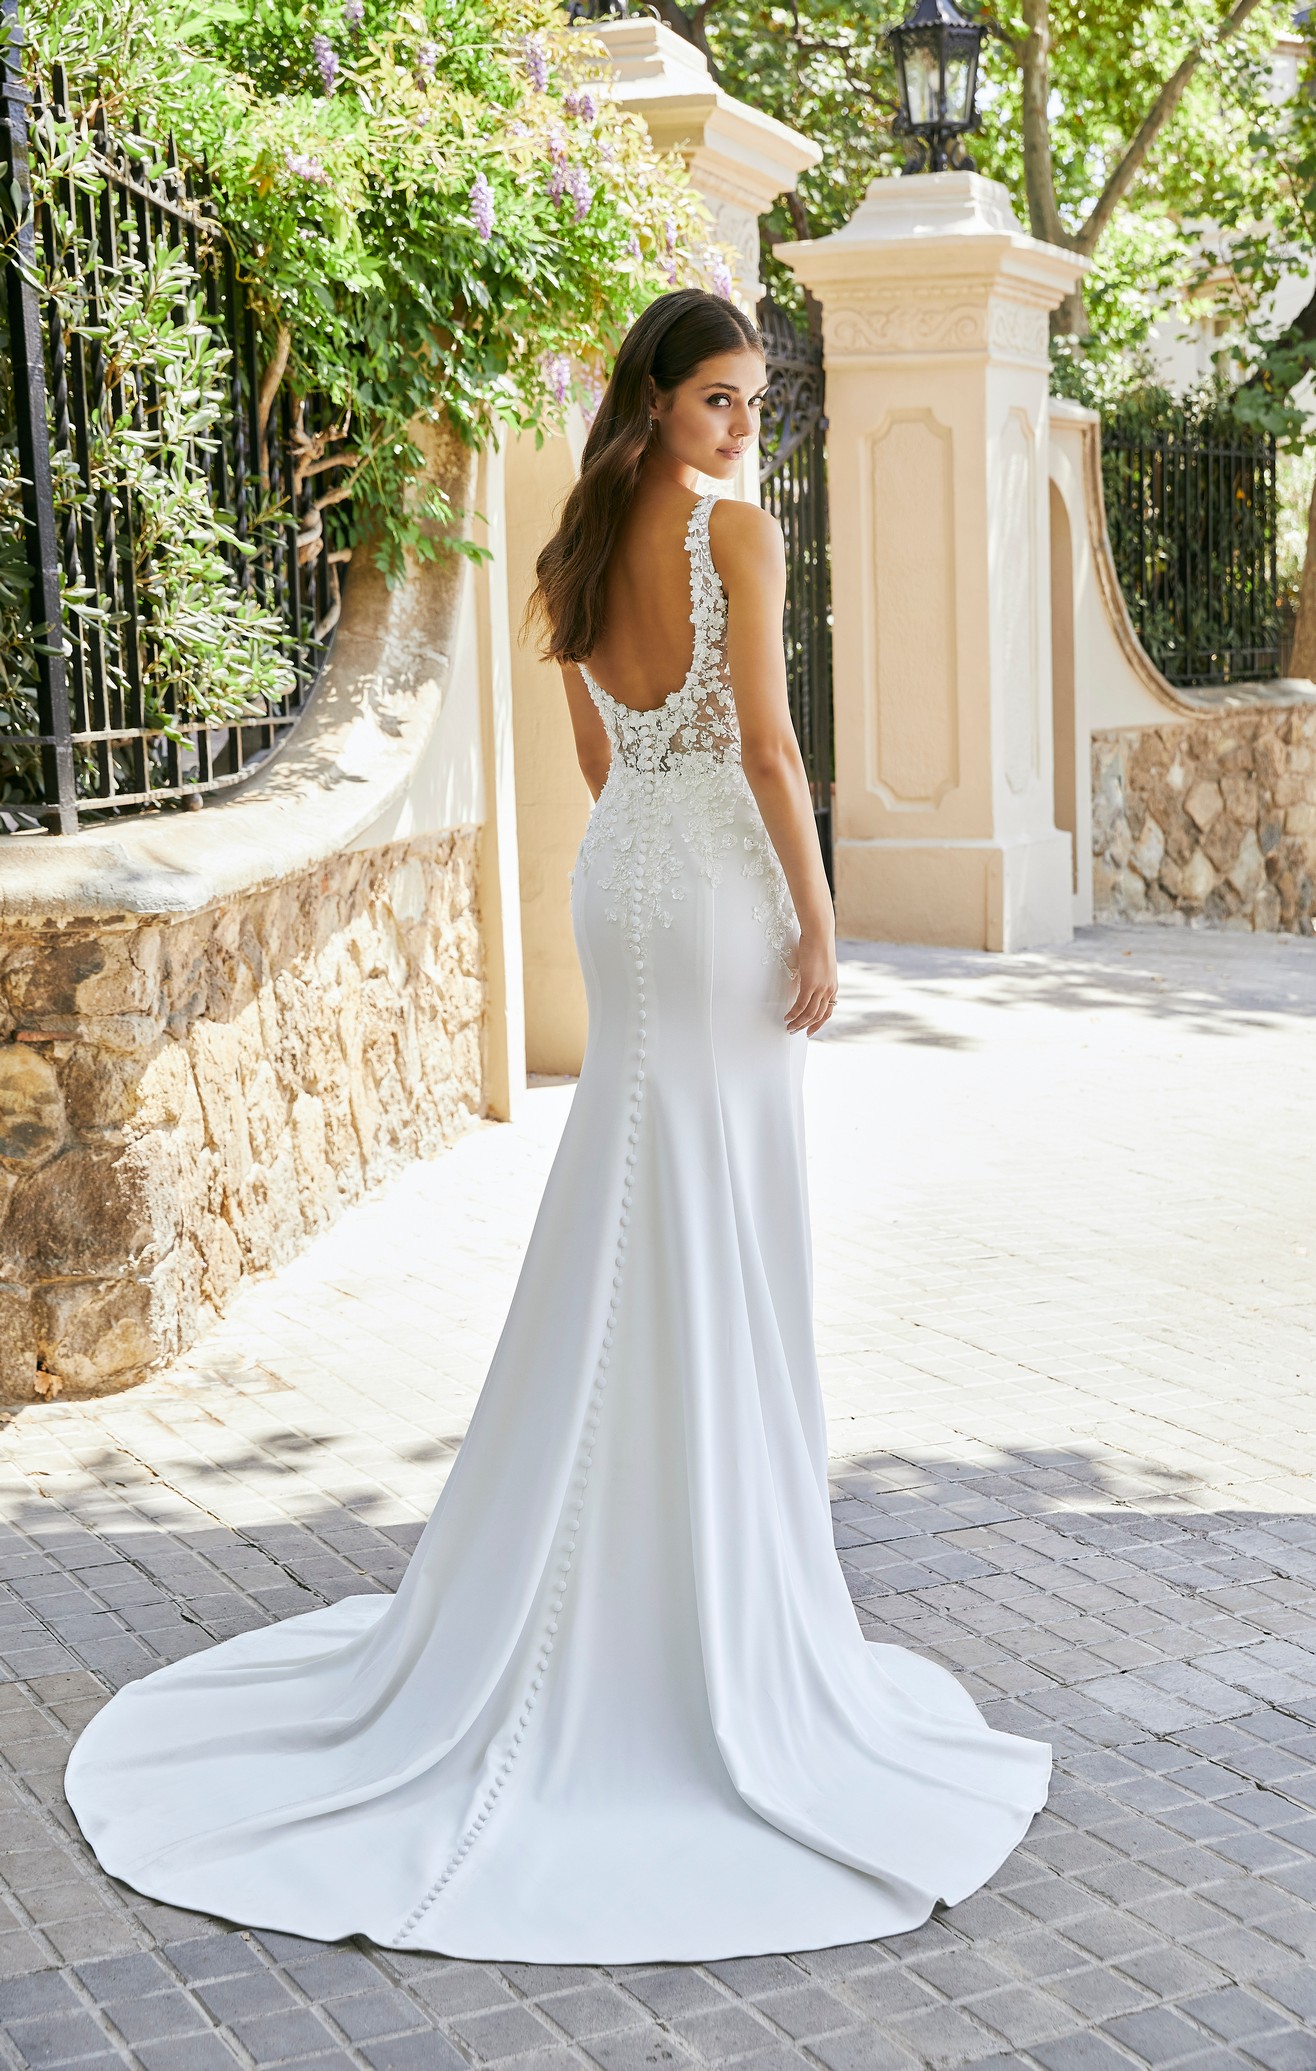 lady standing on street in Barcelona in front of gates wearing fitted crepe wedding dress with low back and button detailing